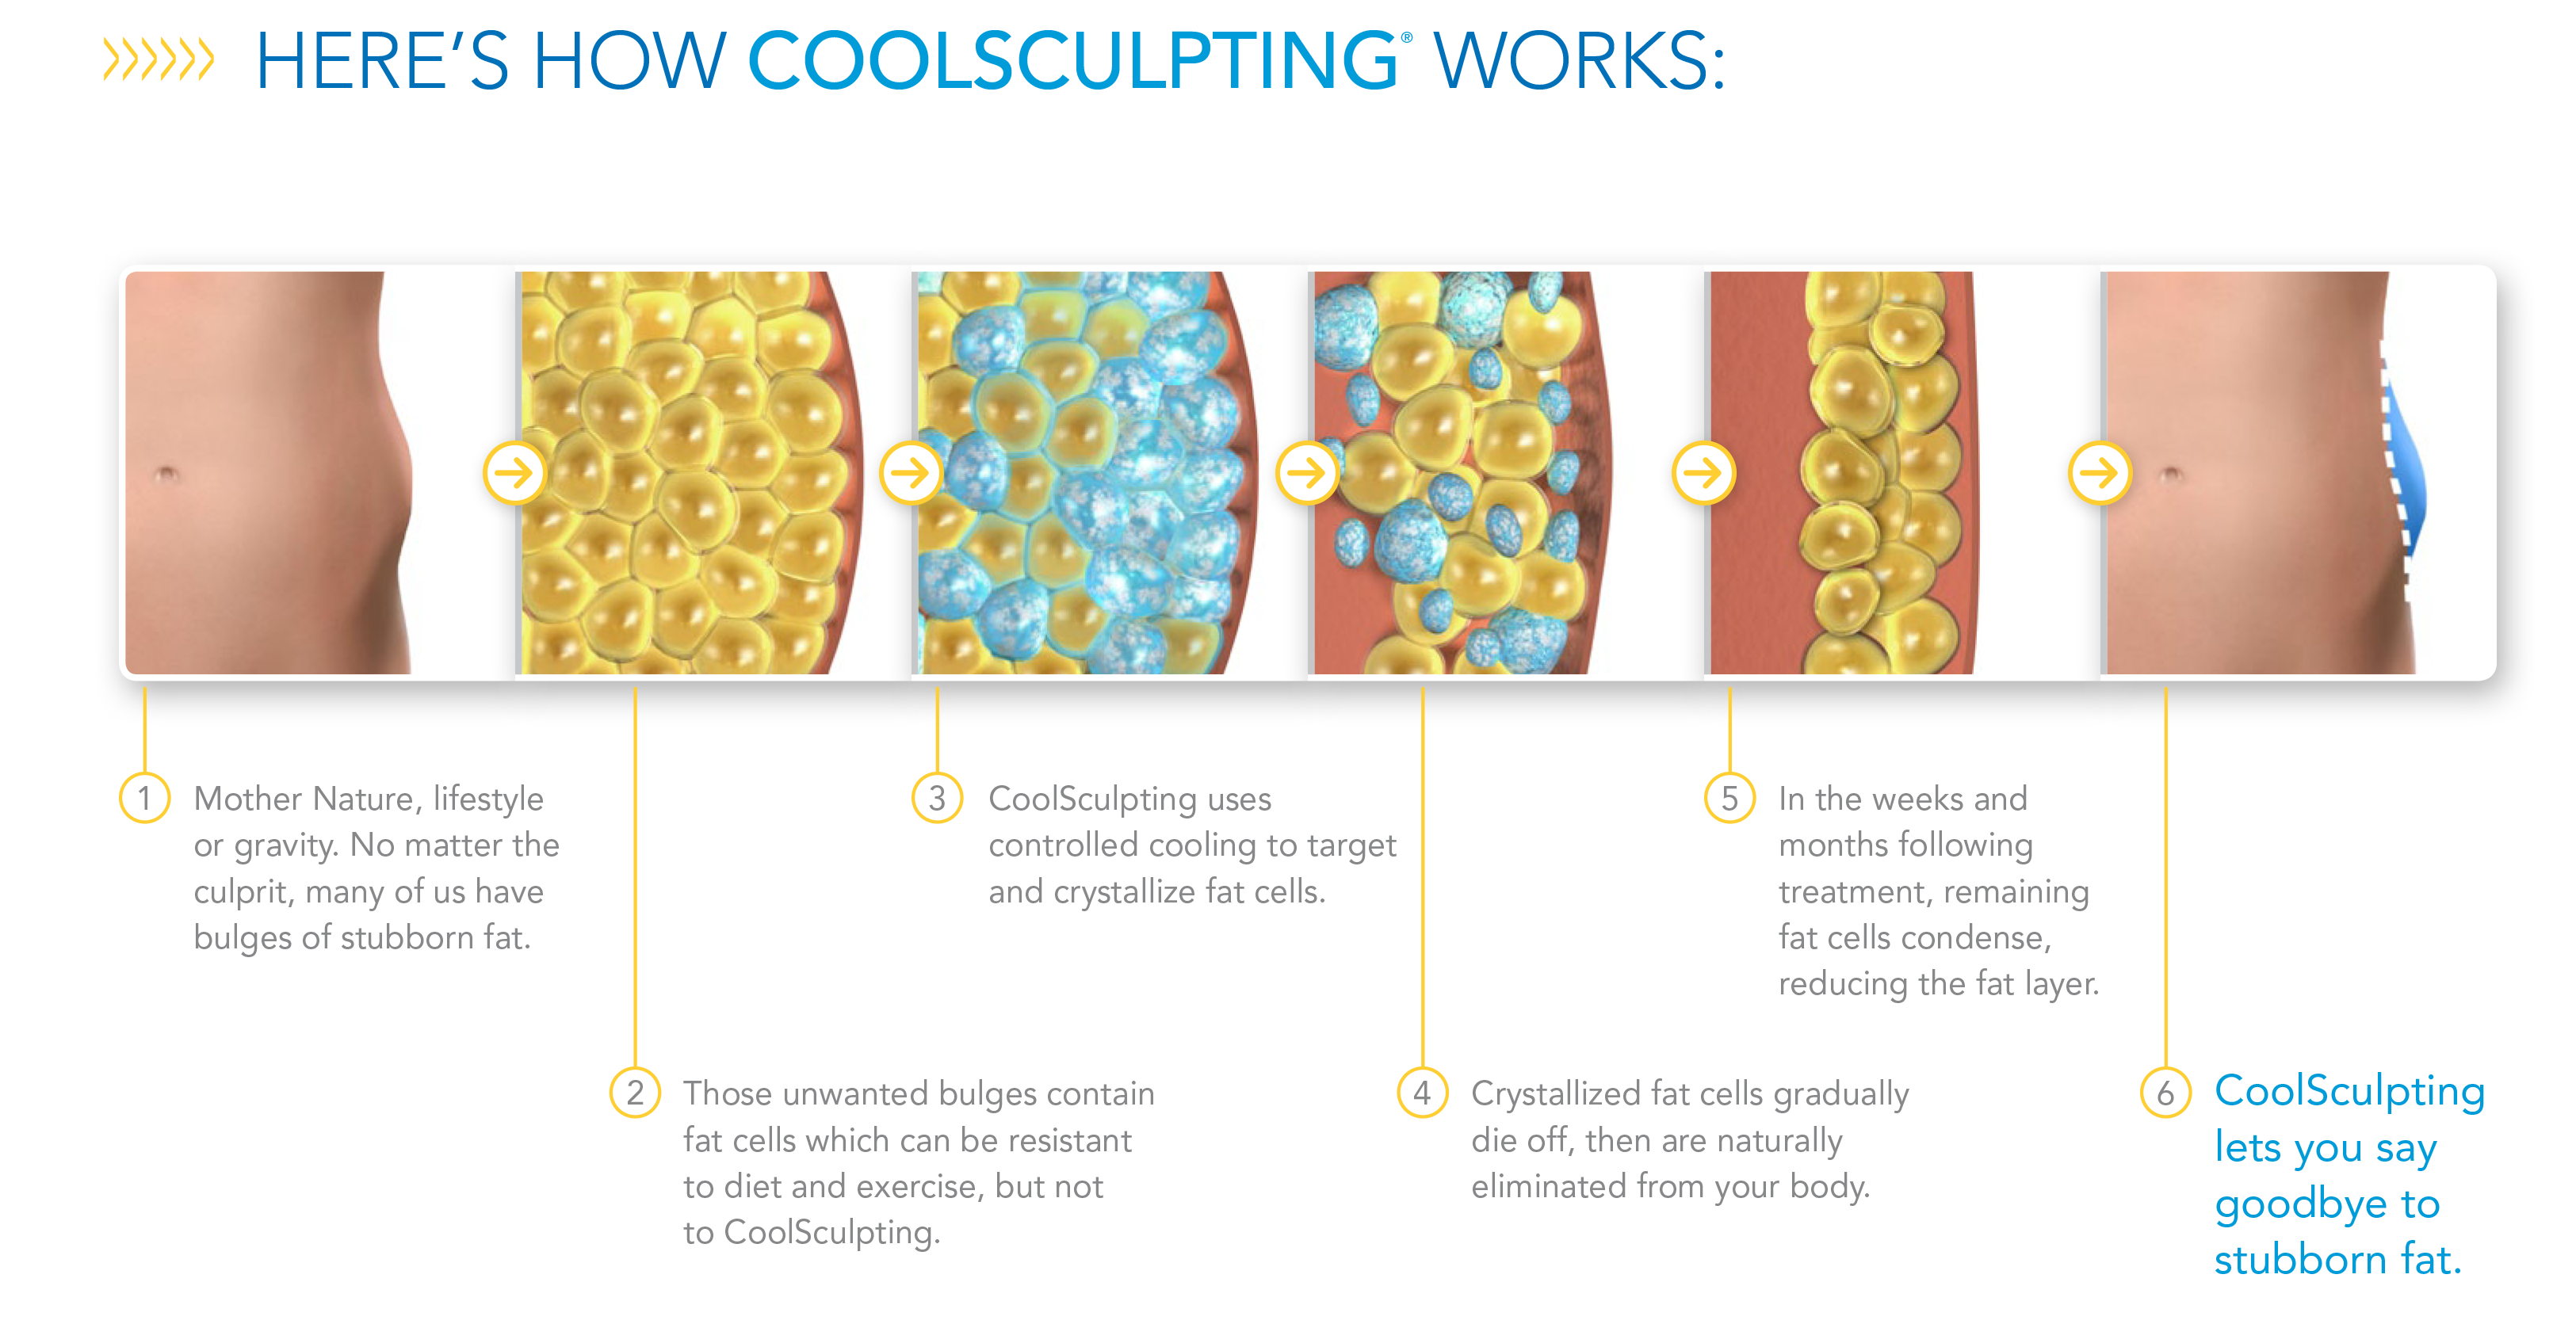 How Coolsculpting works